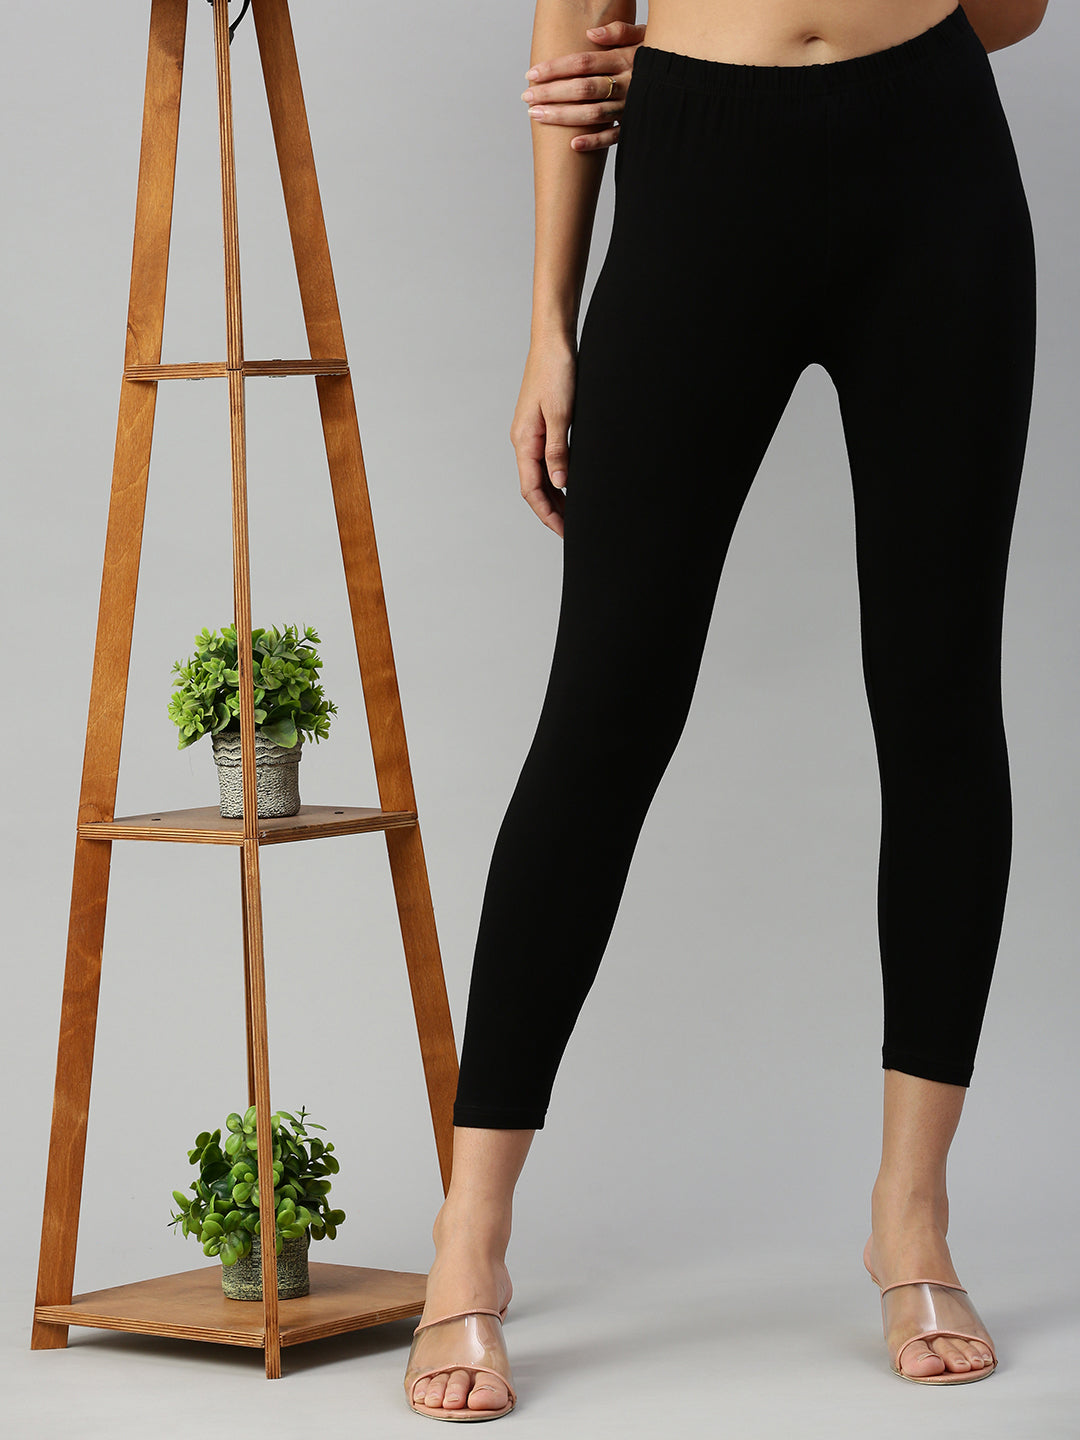 Leggings Styles, Part 1: High and Mid Rise, Full Length and Capris